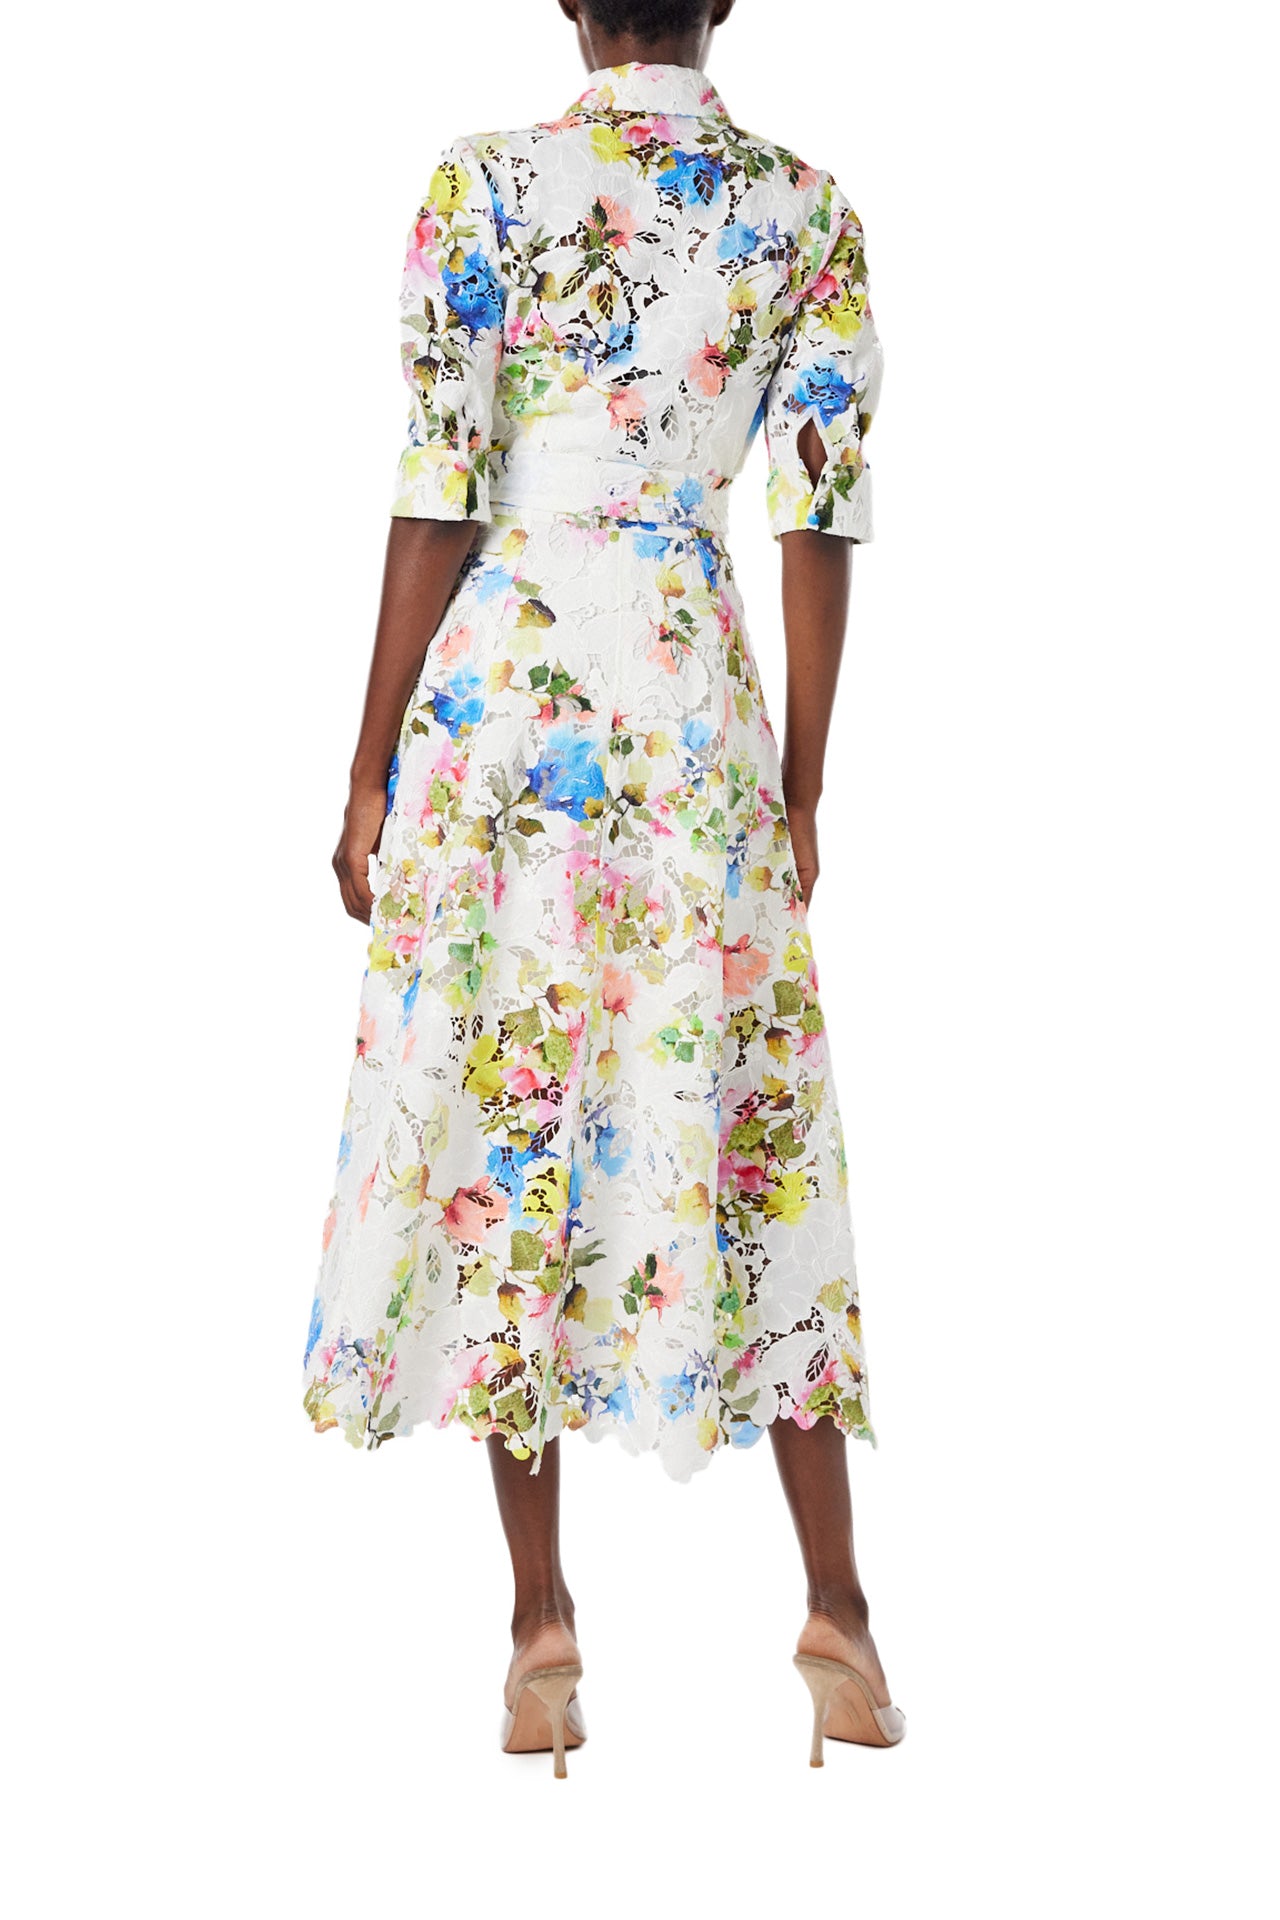 Monique Lhuillier Spring 2024 silk white floral printed lace shirt dress with pockets and a scalloped hem - back.